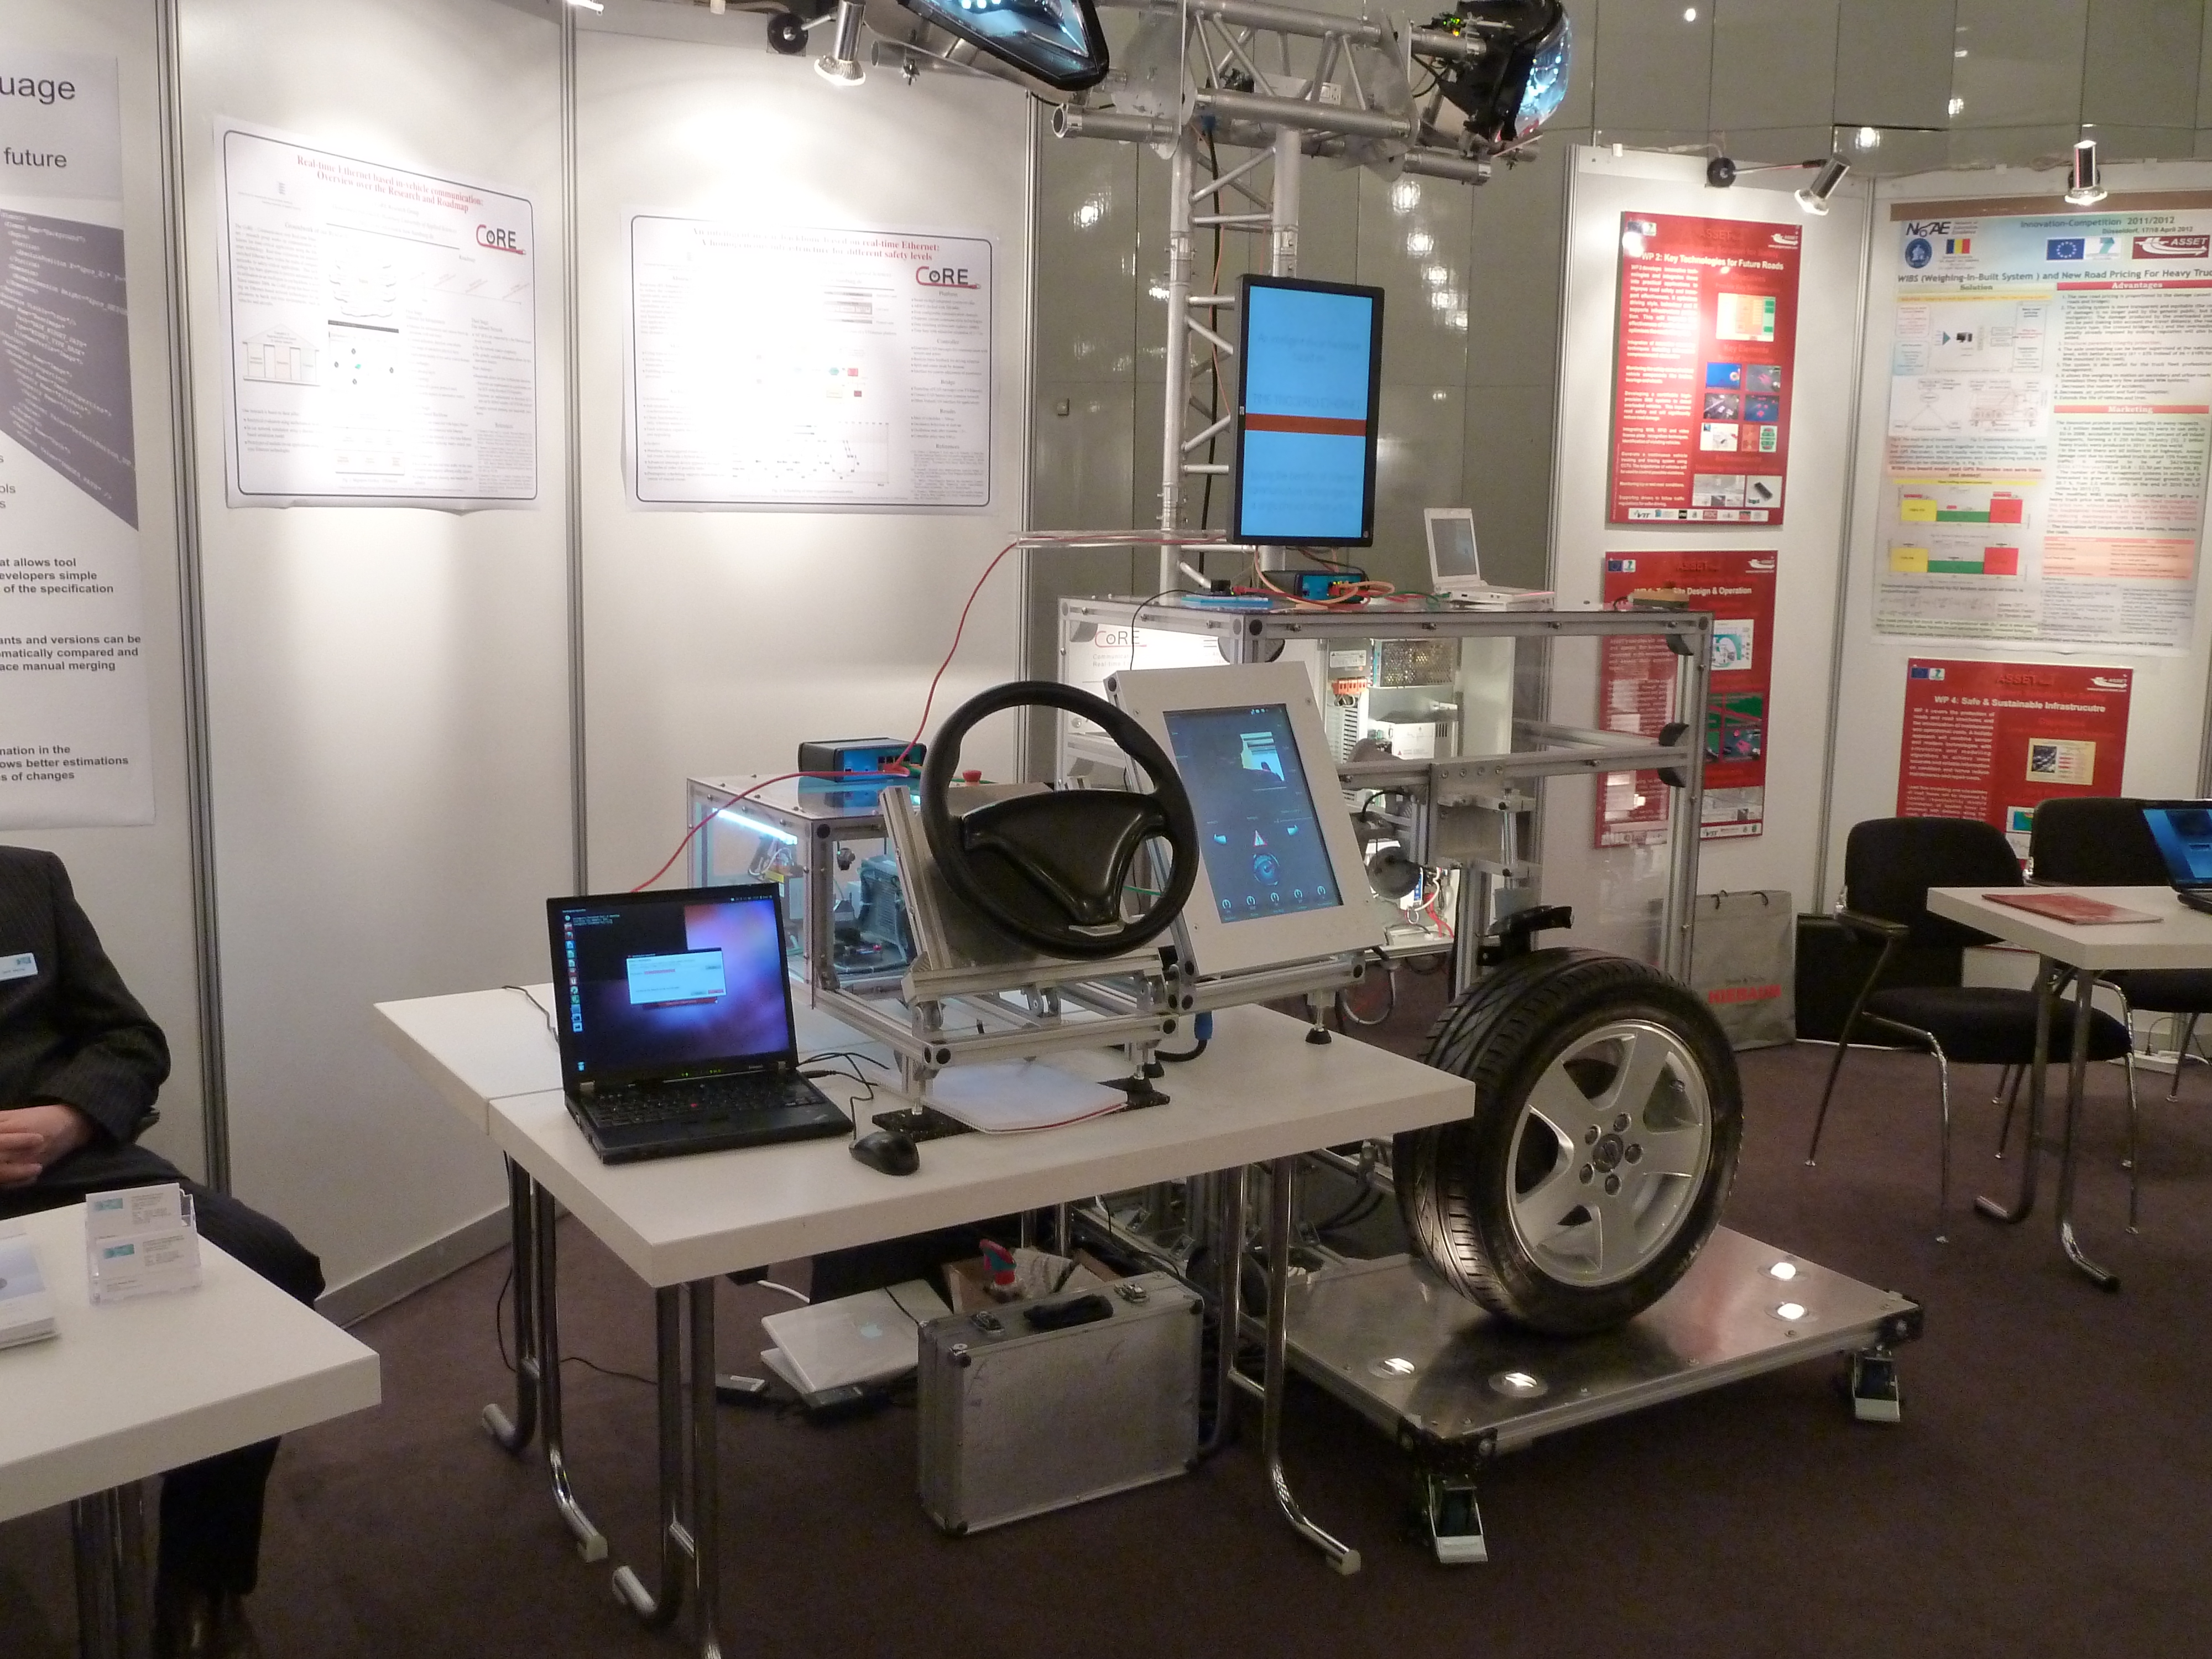 The Demonstrator presented at the NoAE-Project Day 2012